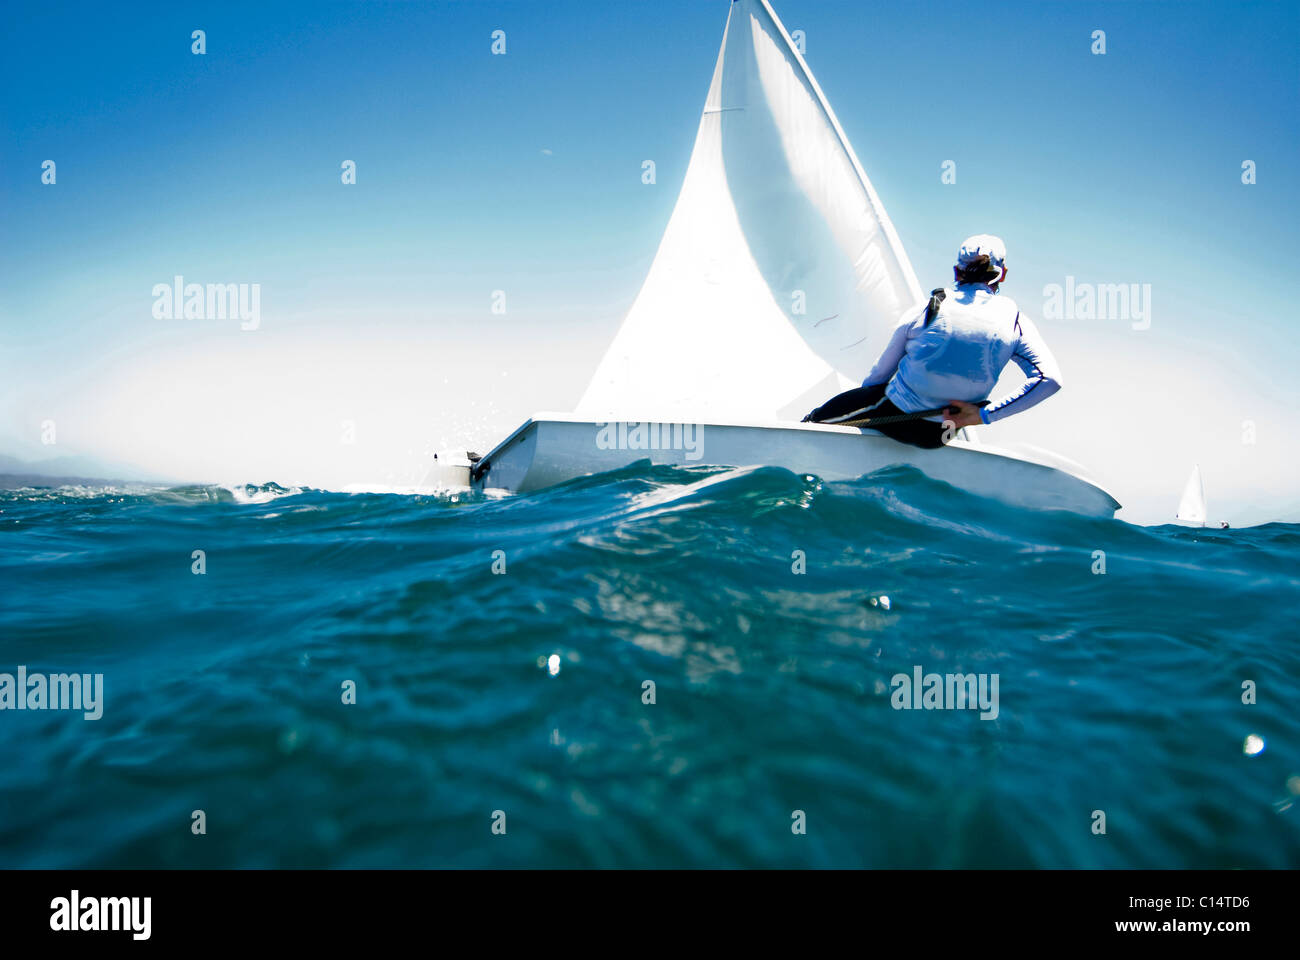 A female athlete races a boat during a training session in Mexico. Stock Photo